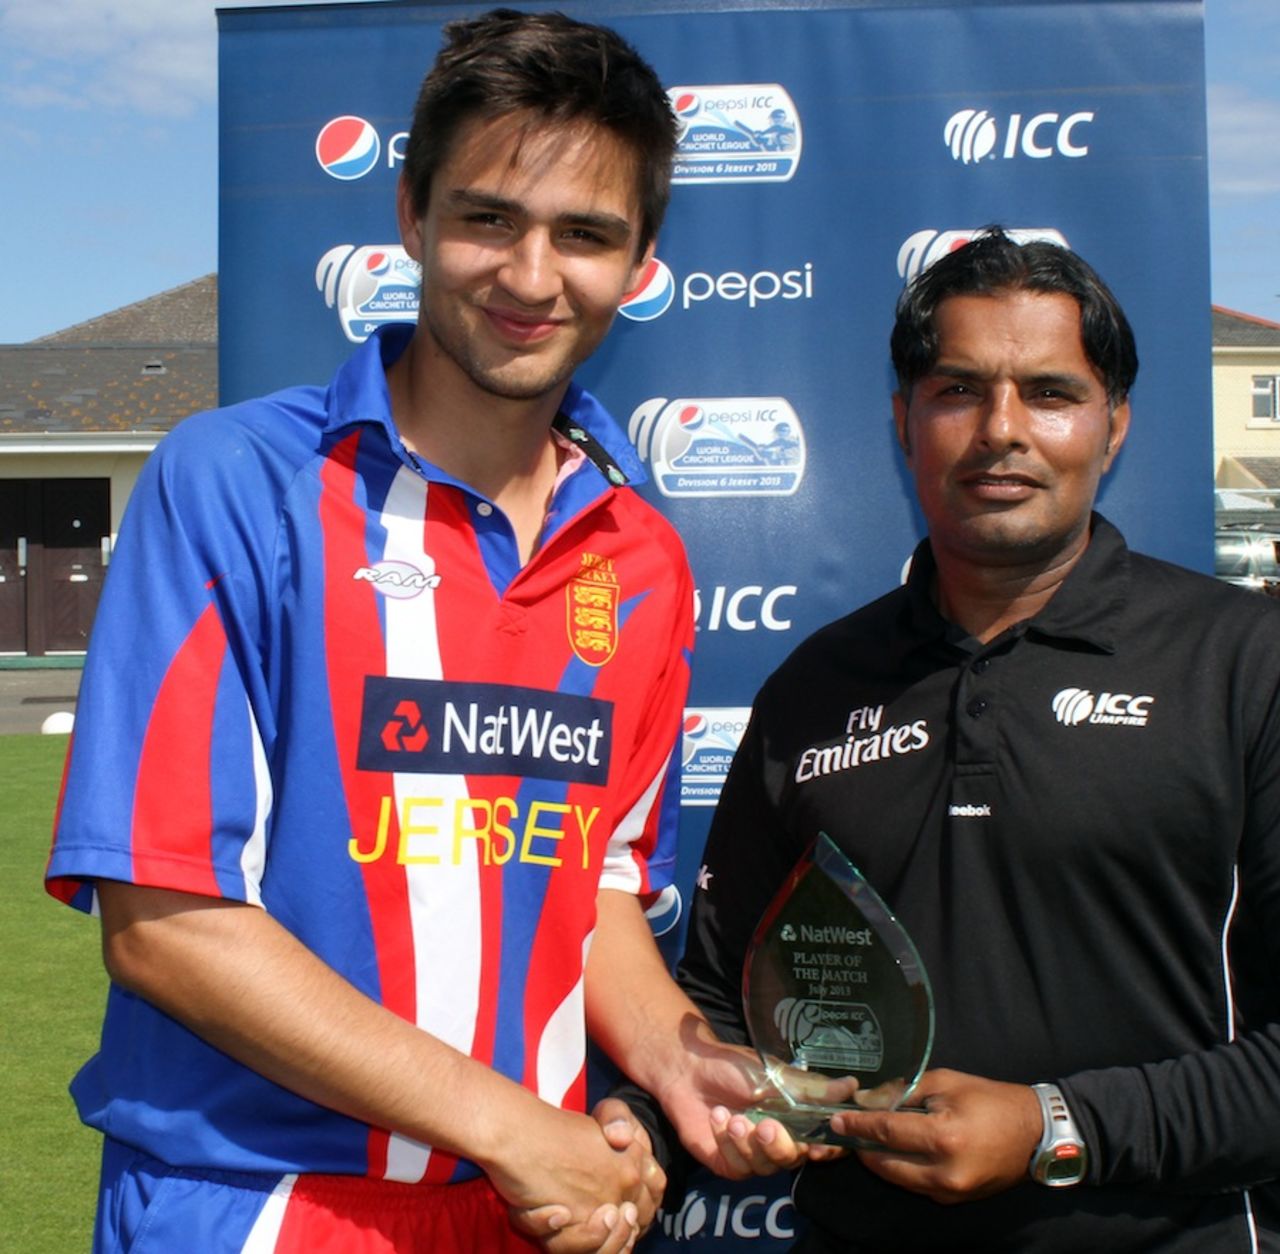 Ben Stevens was named Man of the Match for his all-round performance, Jersey v Nigeria, ICC World Cricket League Division Six, St Clement, July 24, 2013